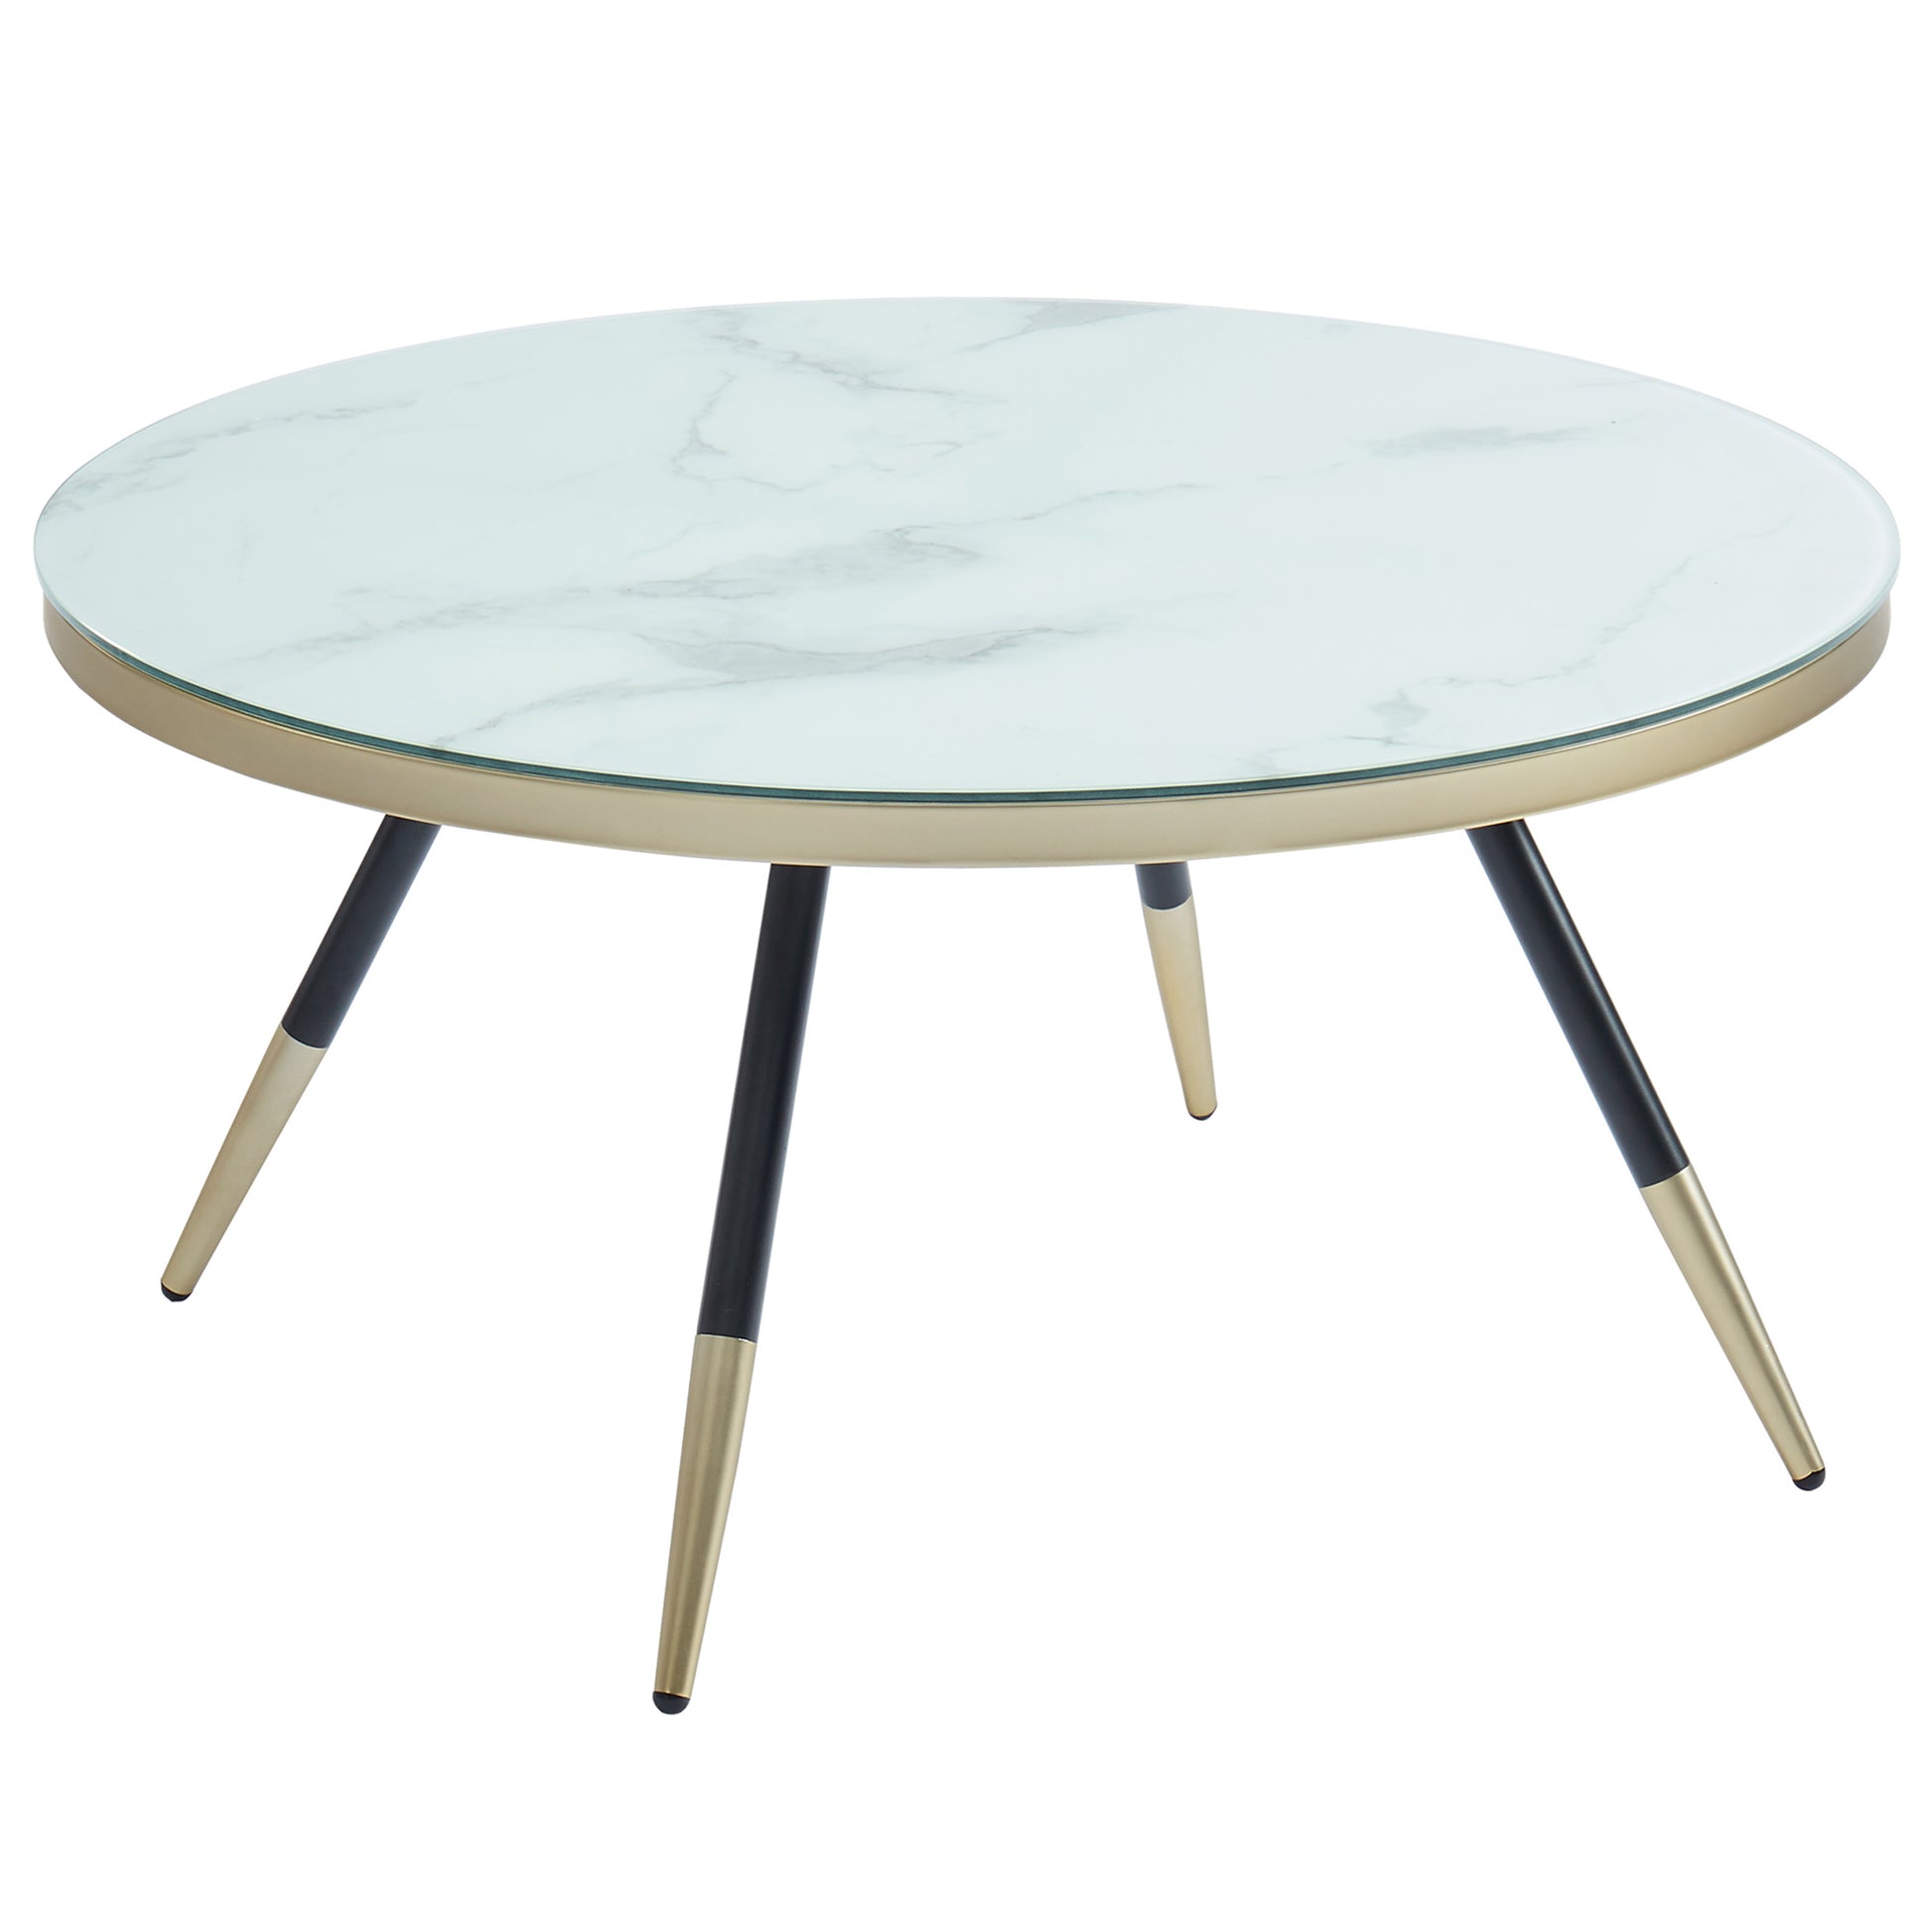 Cordelia Accent Table in White - Dreamart Gallery